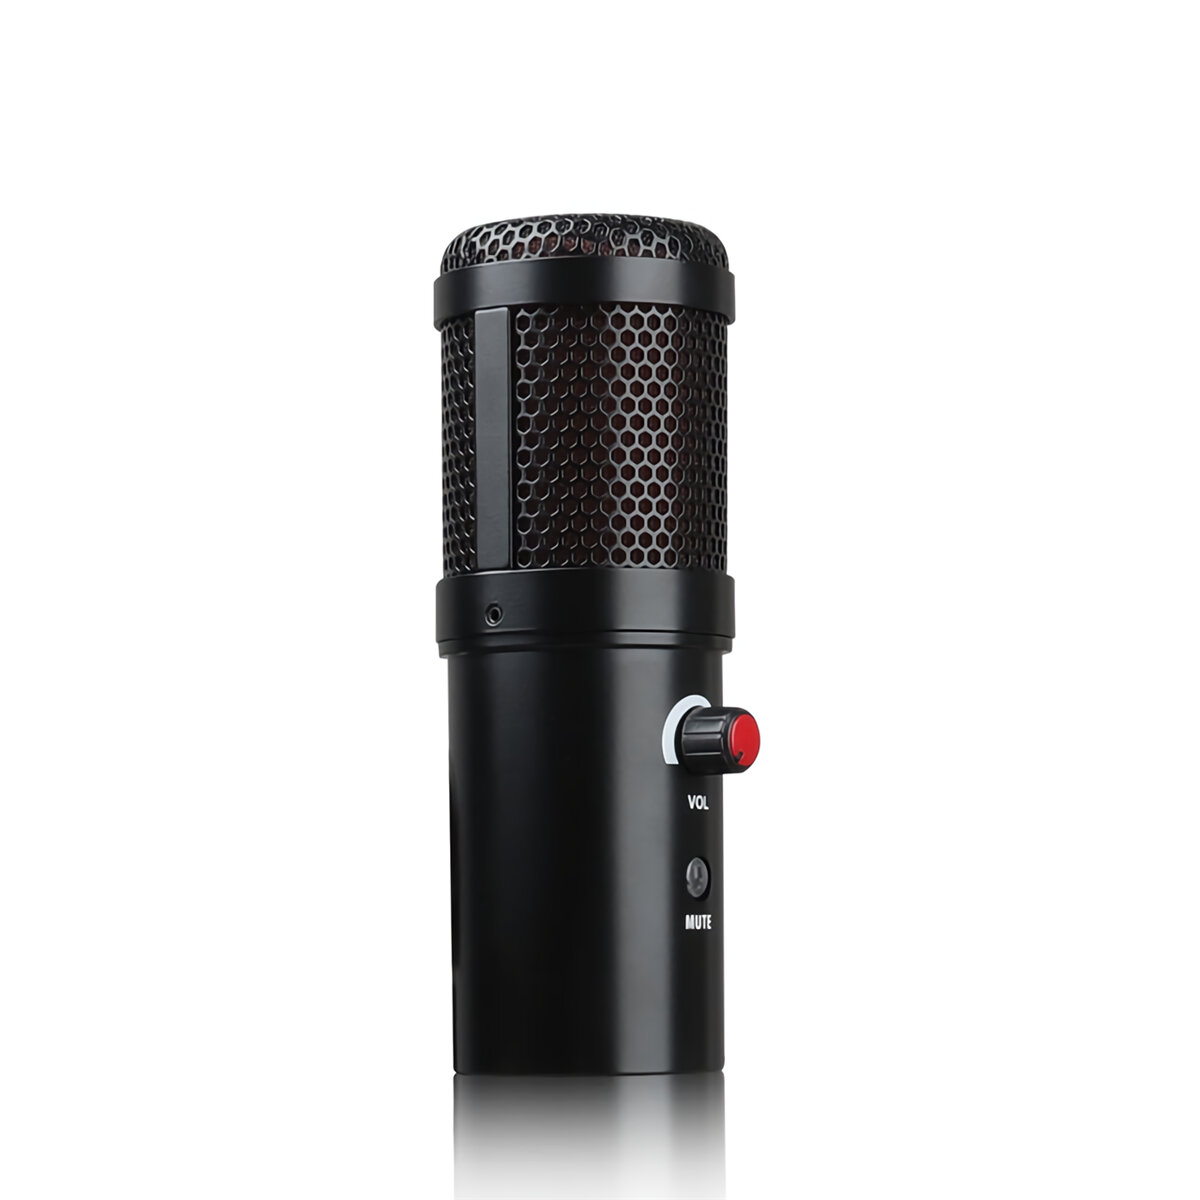 JPMIC A6S Condenser Microphone Set USB Cardioid-directional Sound Recording Vocal Microphone 192KHZ/24Bit RGB Gaming Mic with Tripod Stand for Mobile Phone PC Computer Youtube Live Game Chat